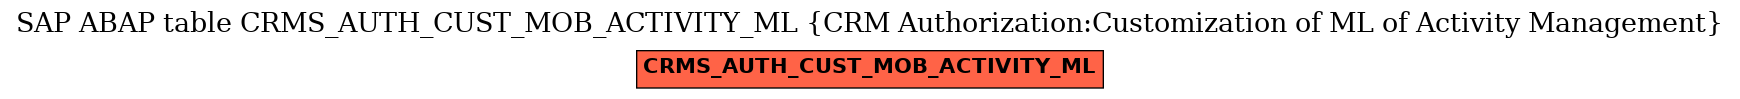 E-R Diagram for table CRMS_AUTH_CUST_MOB_ACTIVITY_ML (CRM Authorization:Customization of ML of Activity Management)